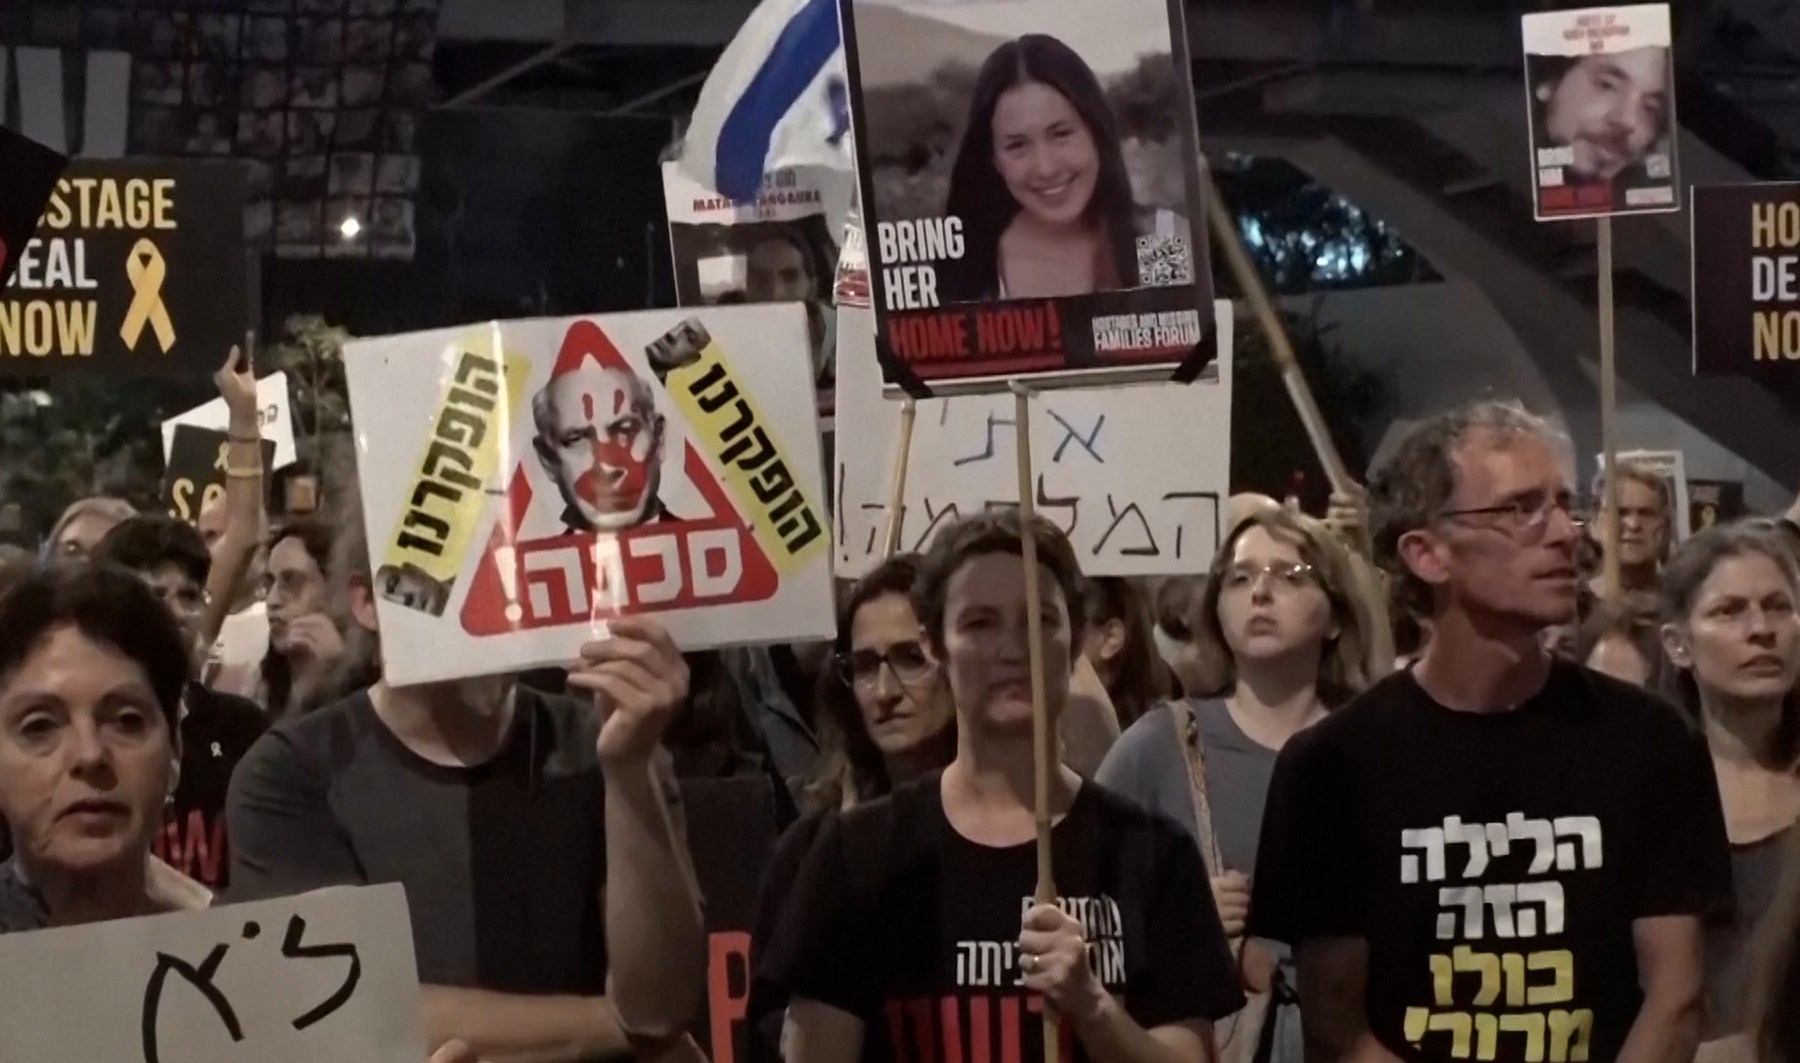 Israeli protesters call for PMs resignation over captives | Politics [Video]